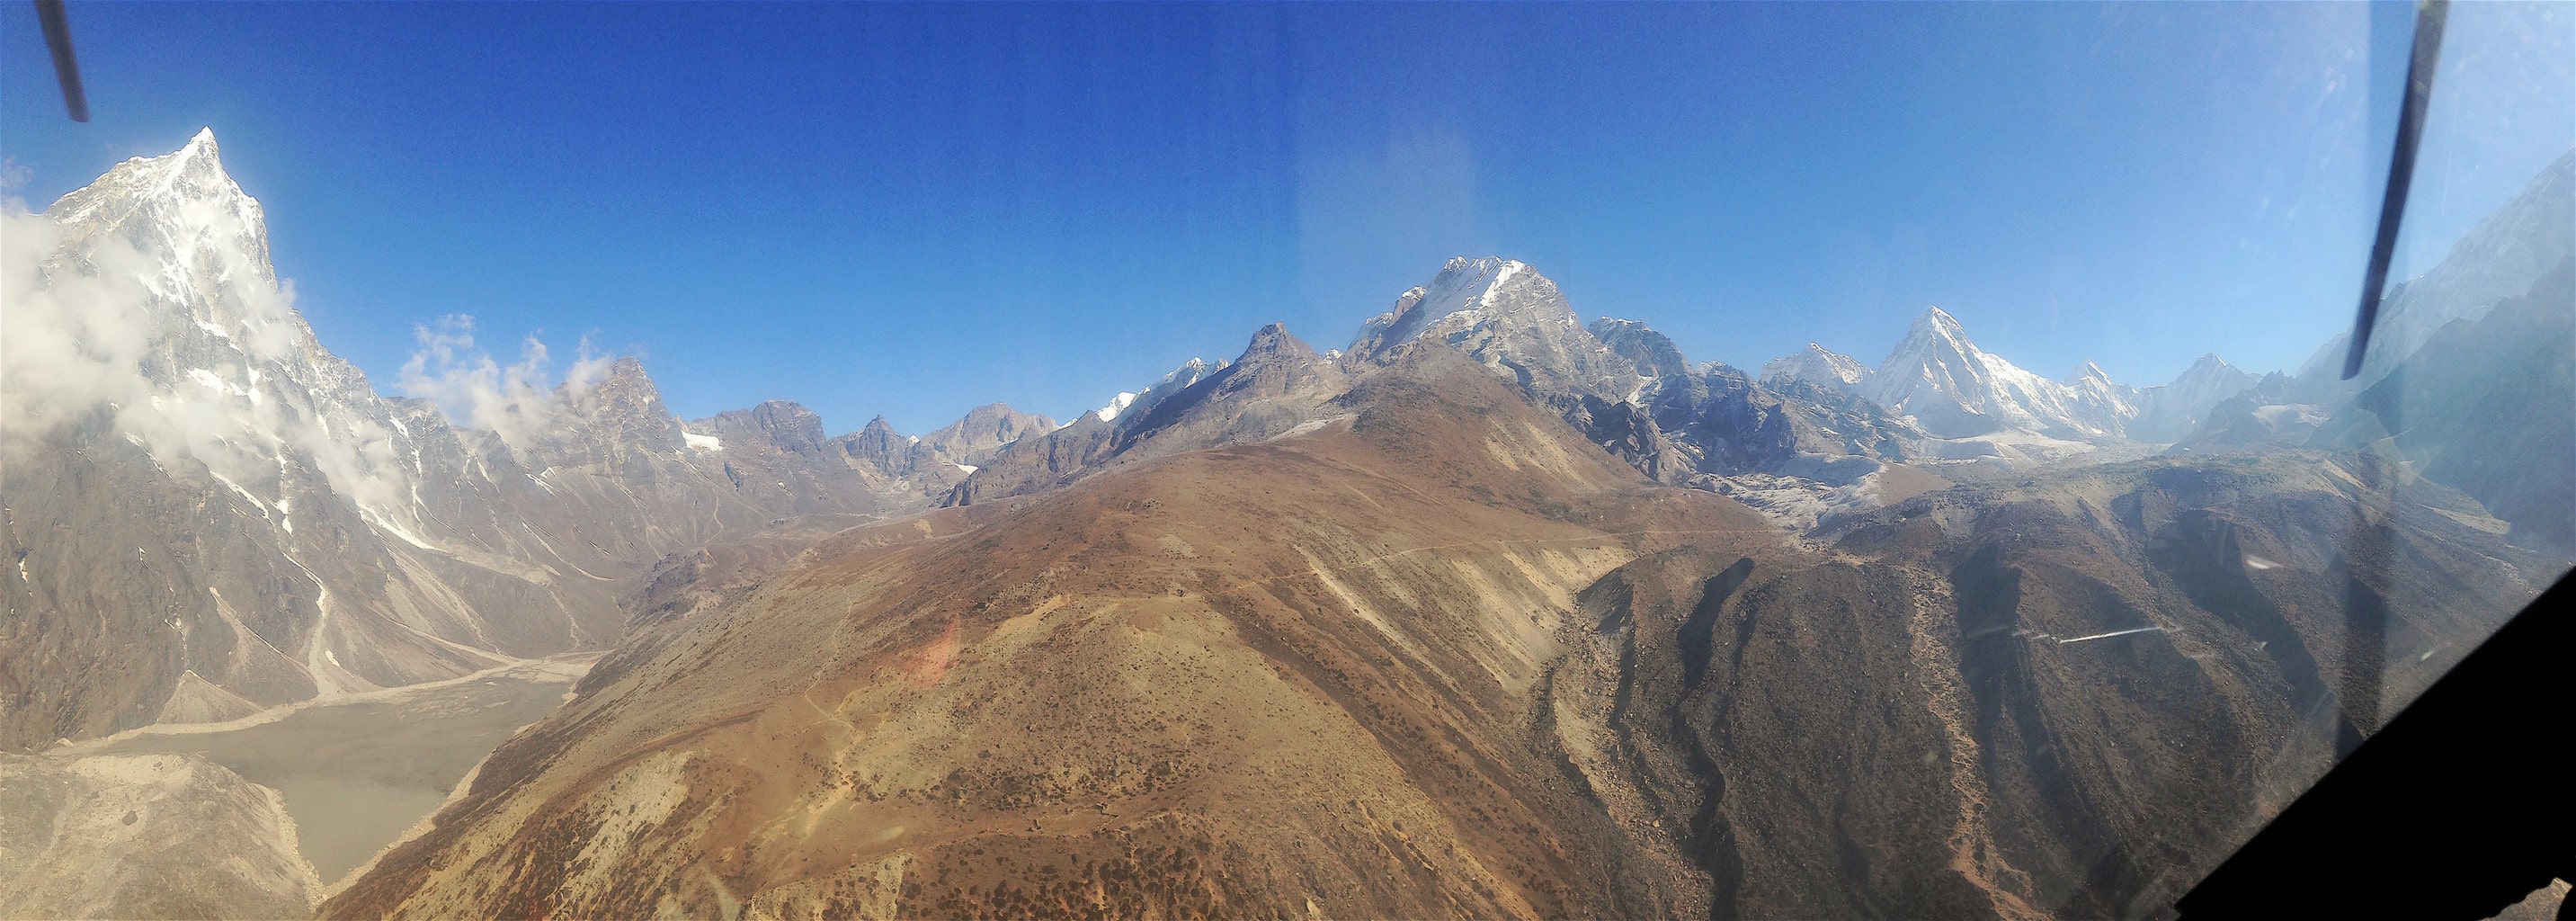 Approaching Everest Base Camp